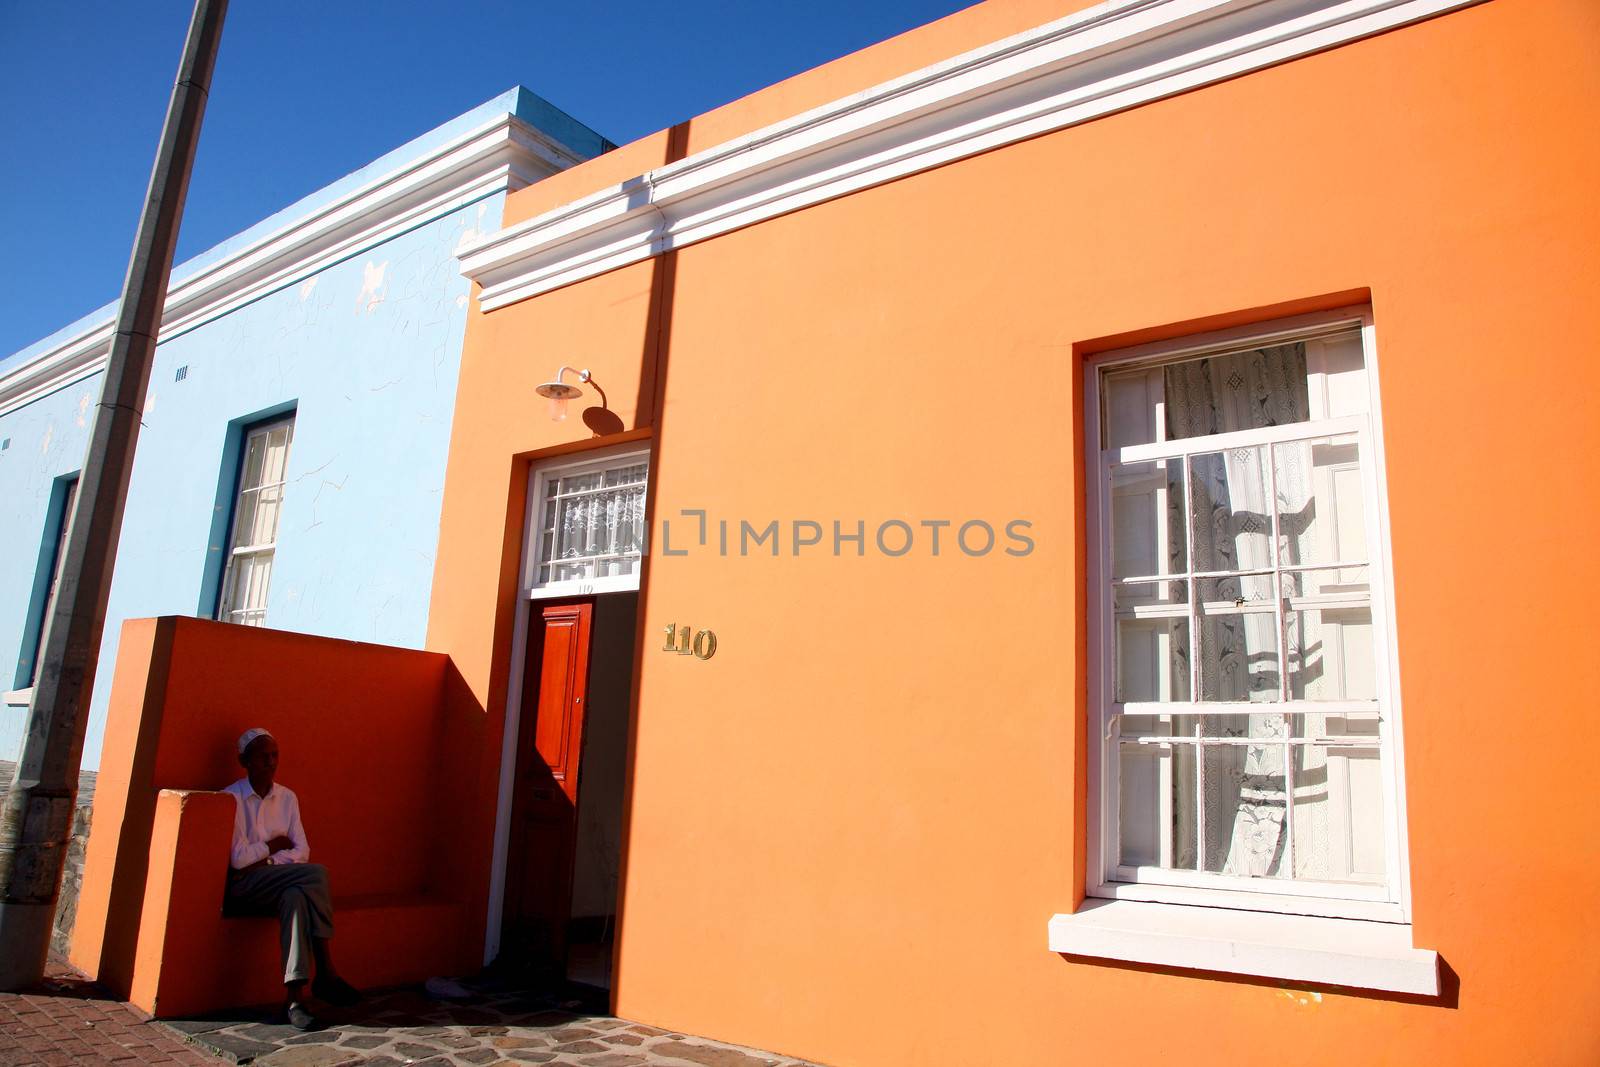 Colourful buildings in Bo-Kaap area of Cape Town